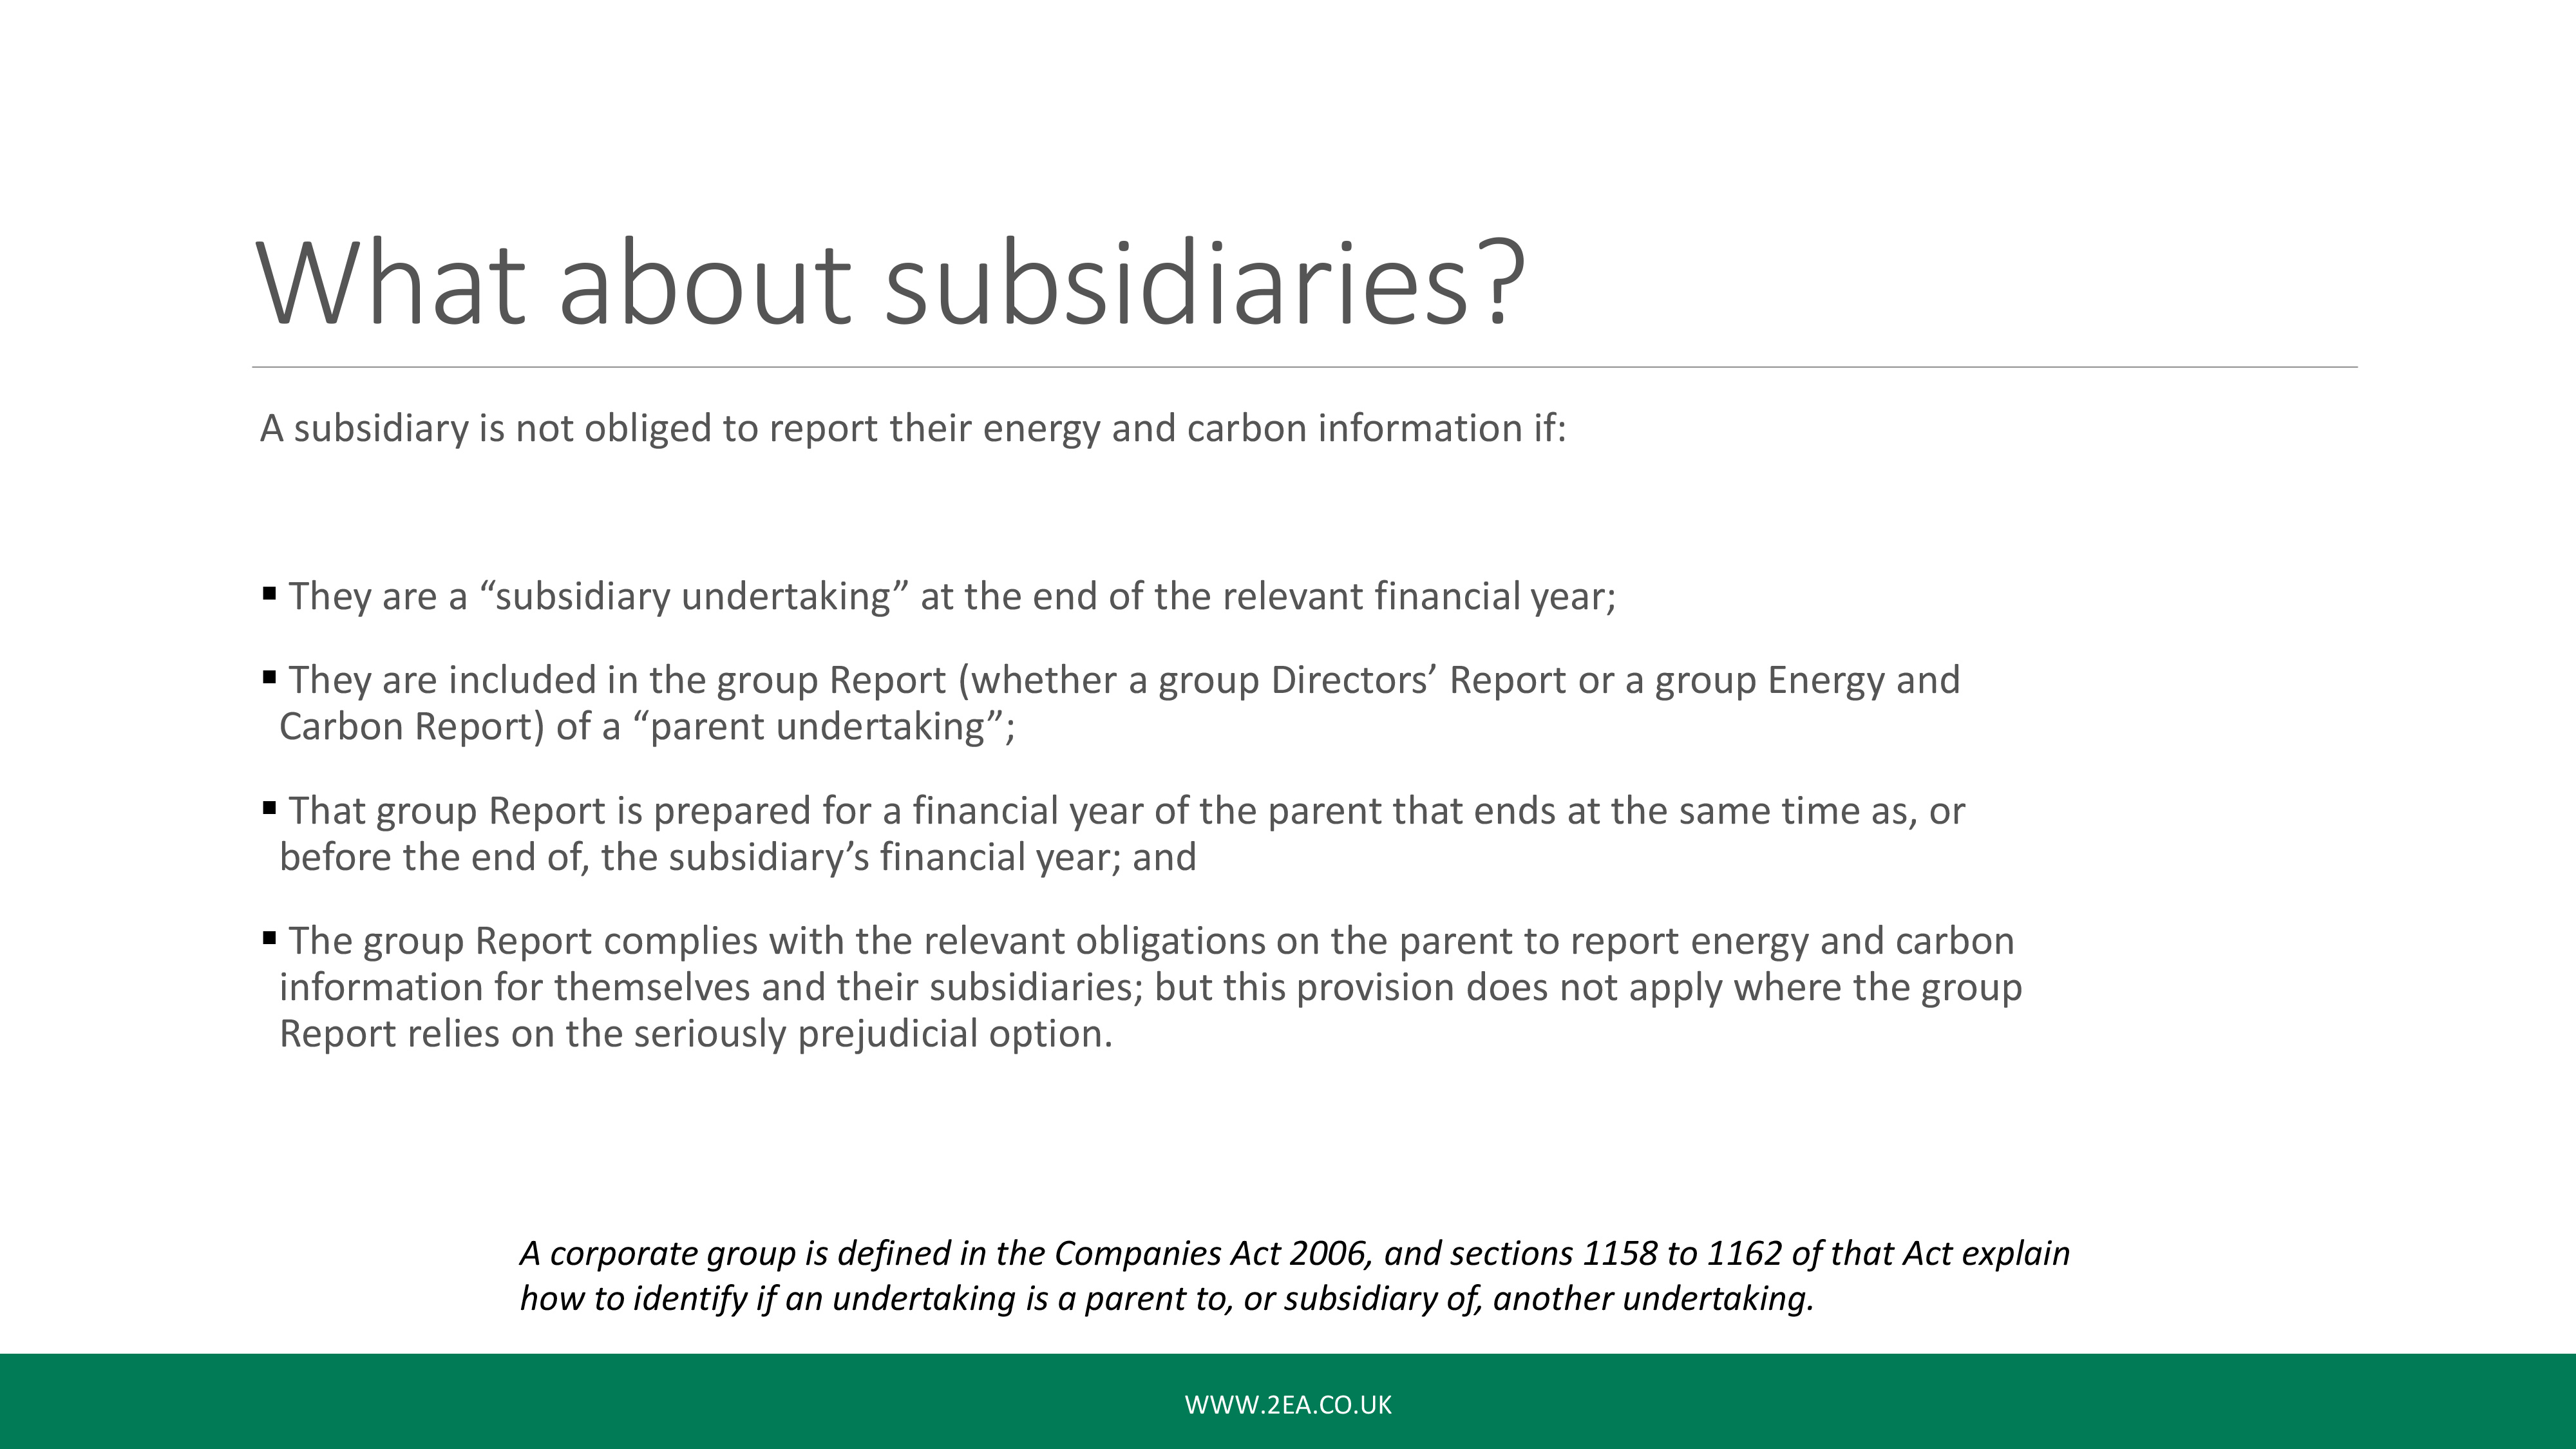 SECR Webinar: What About Subsidiaries?